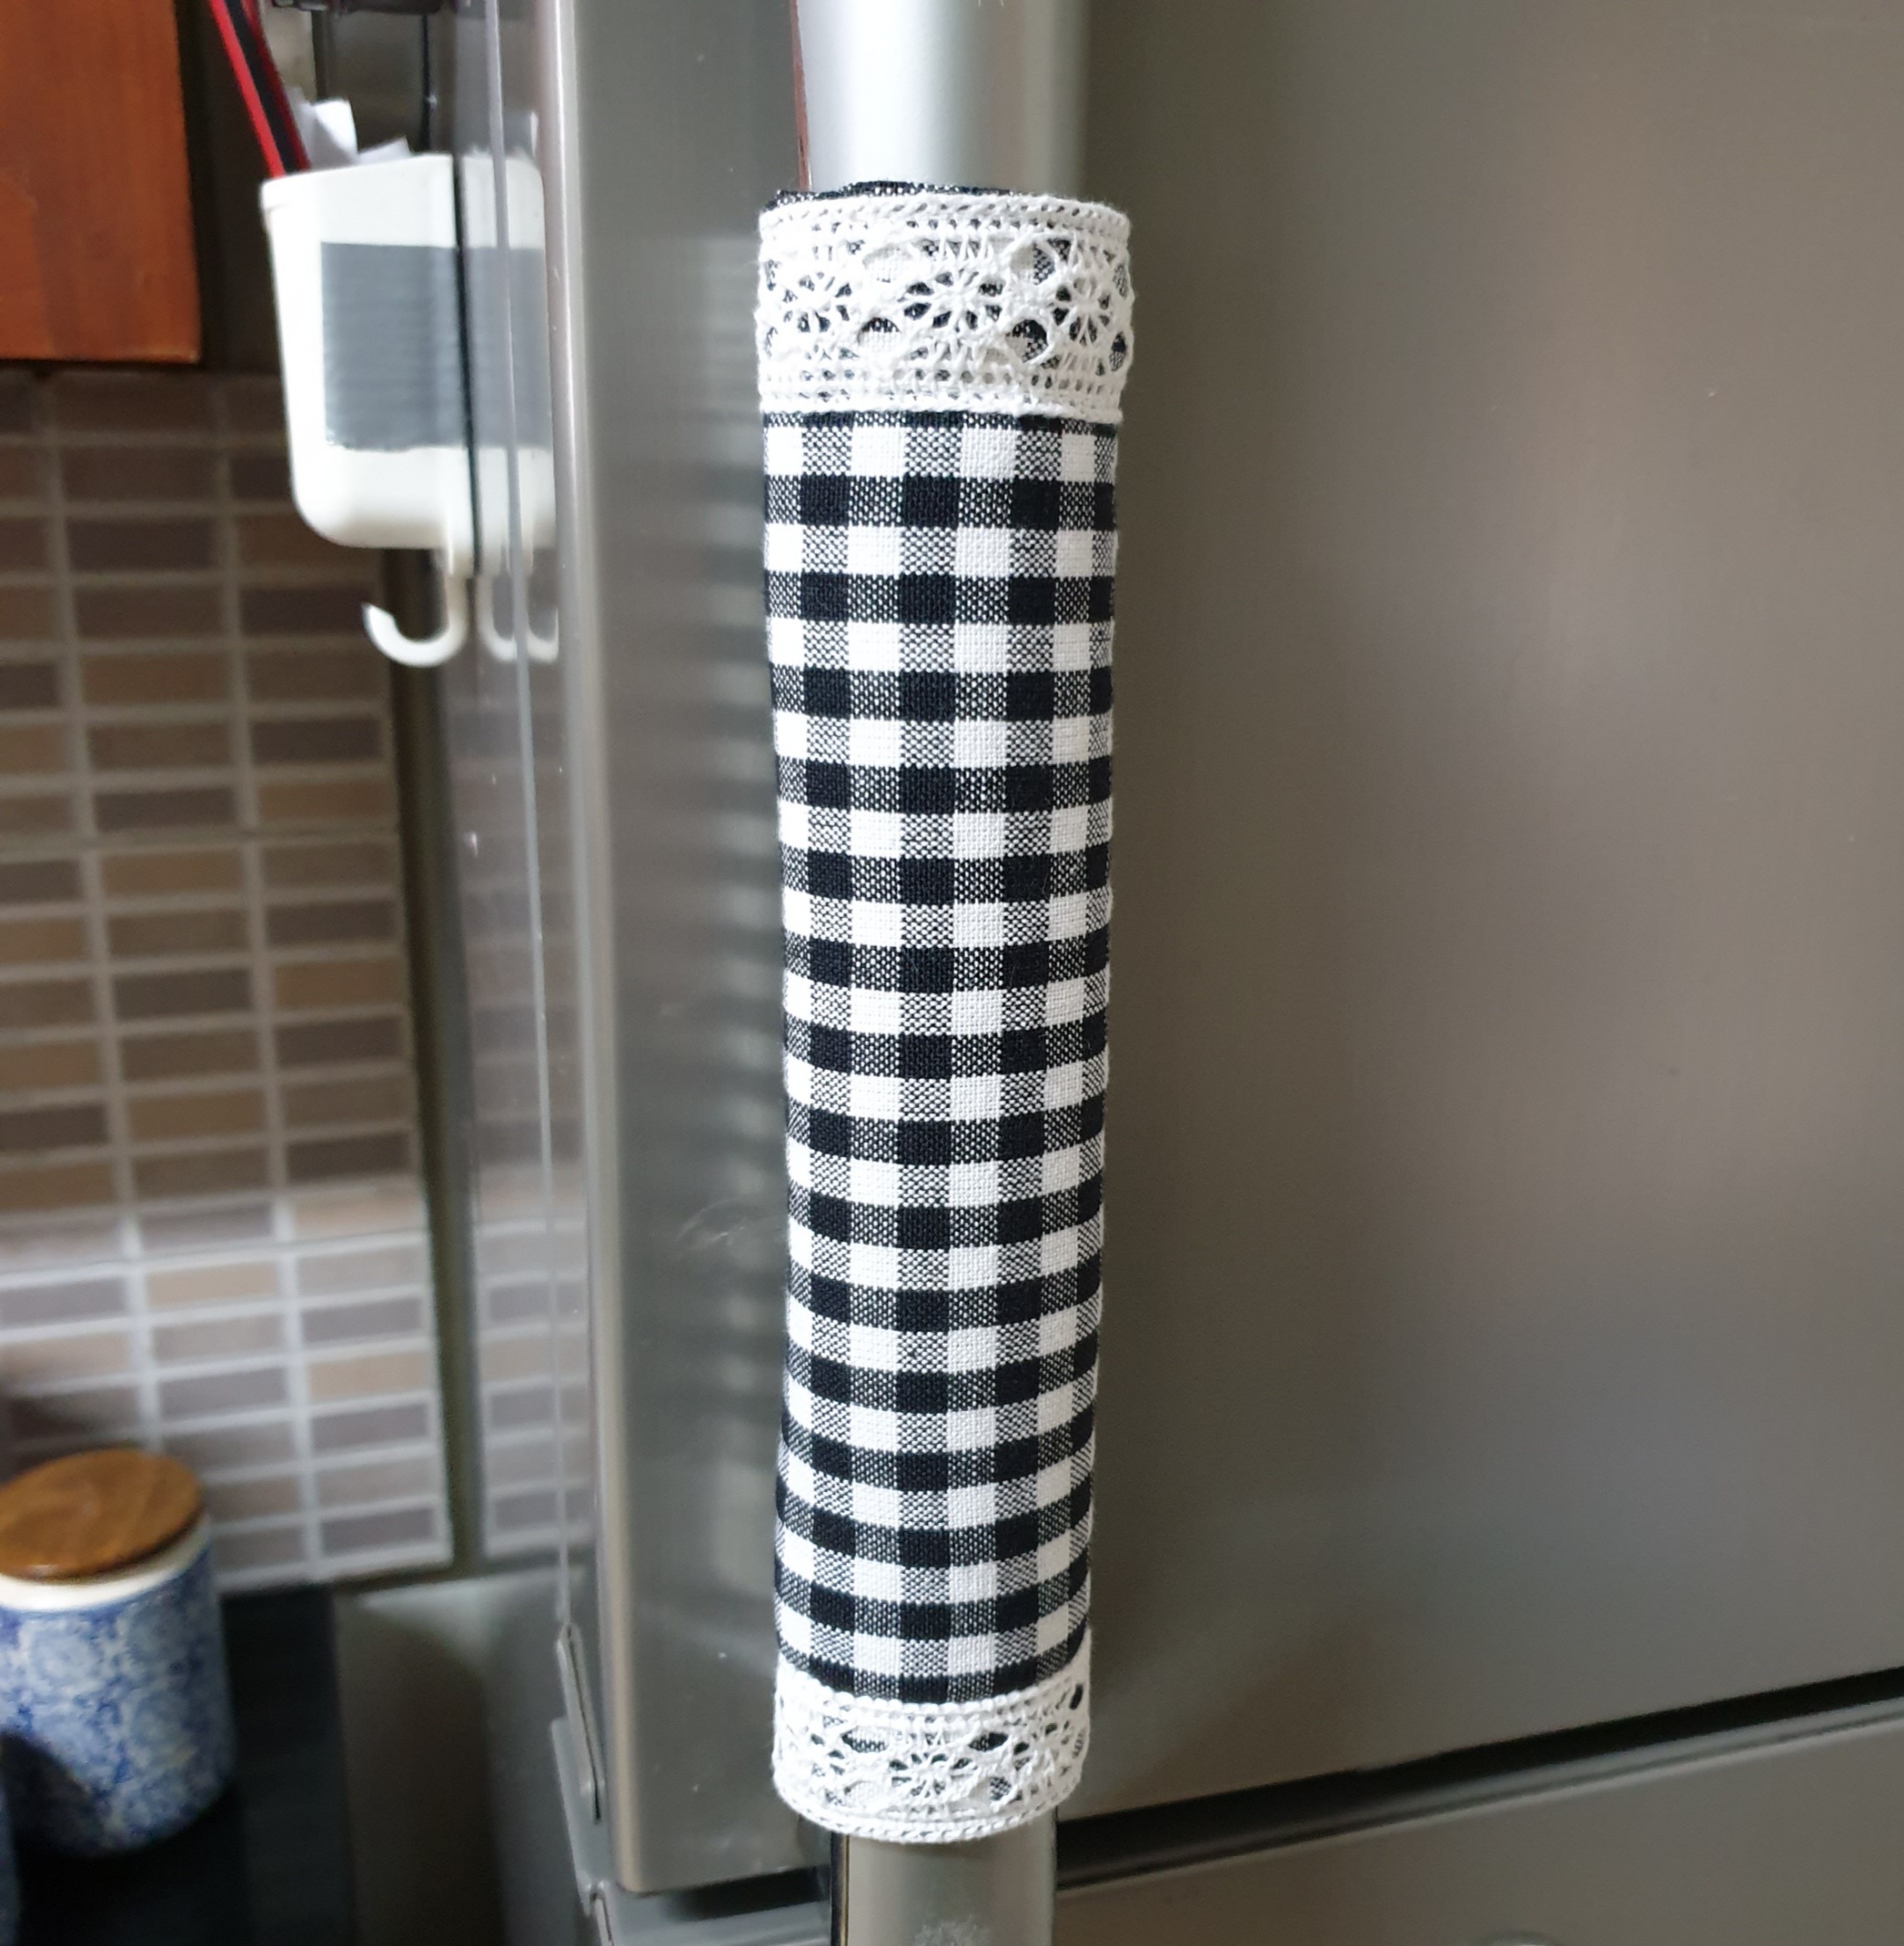 Fridge Handle Covers - Classic black & white gingham with lace themed (Set of 2)